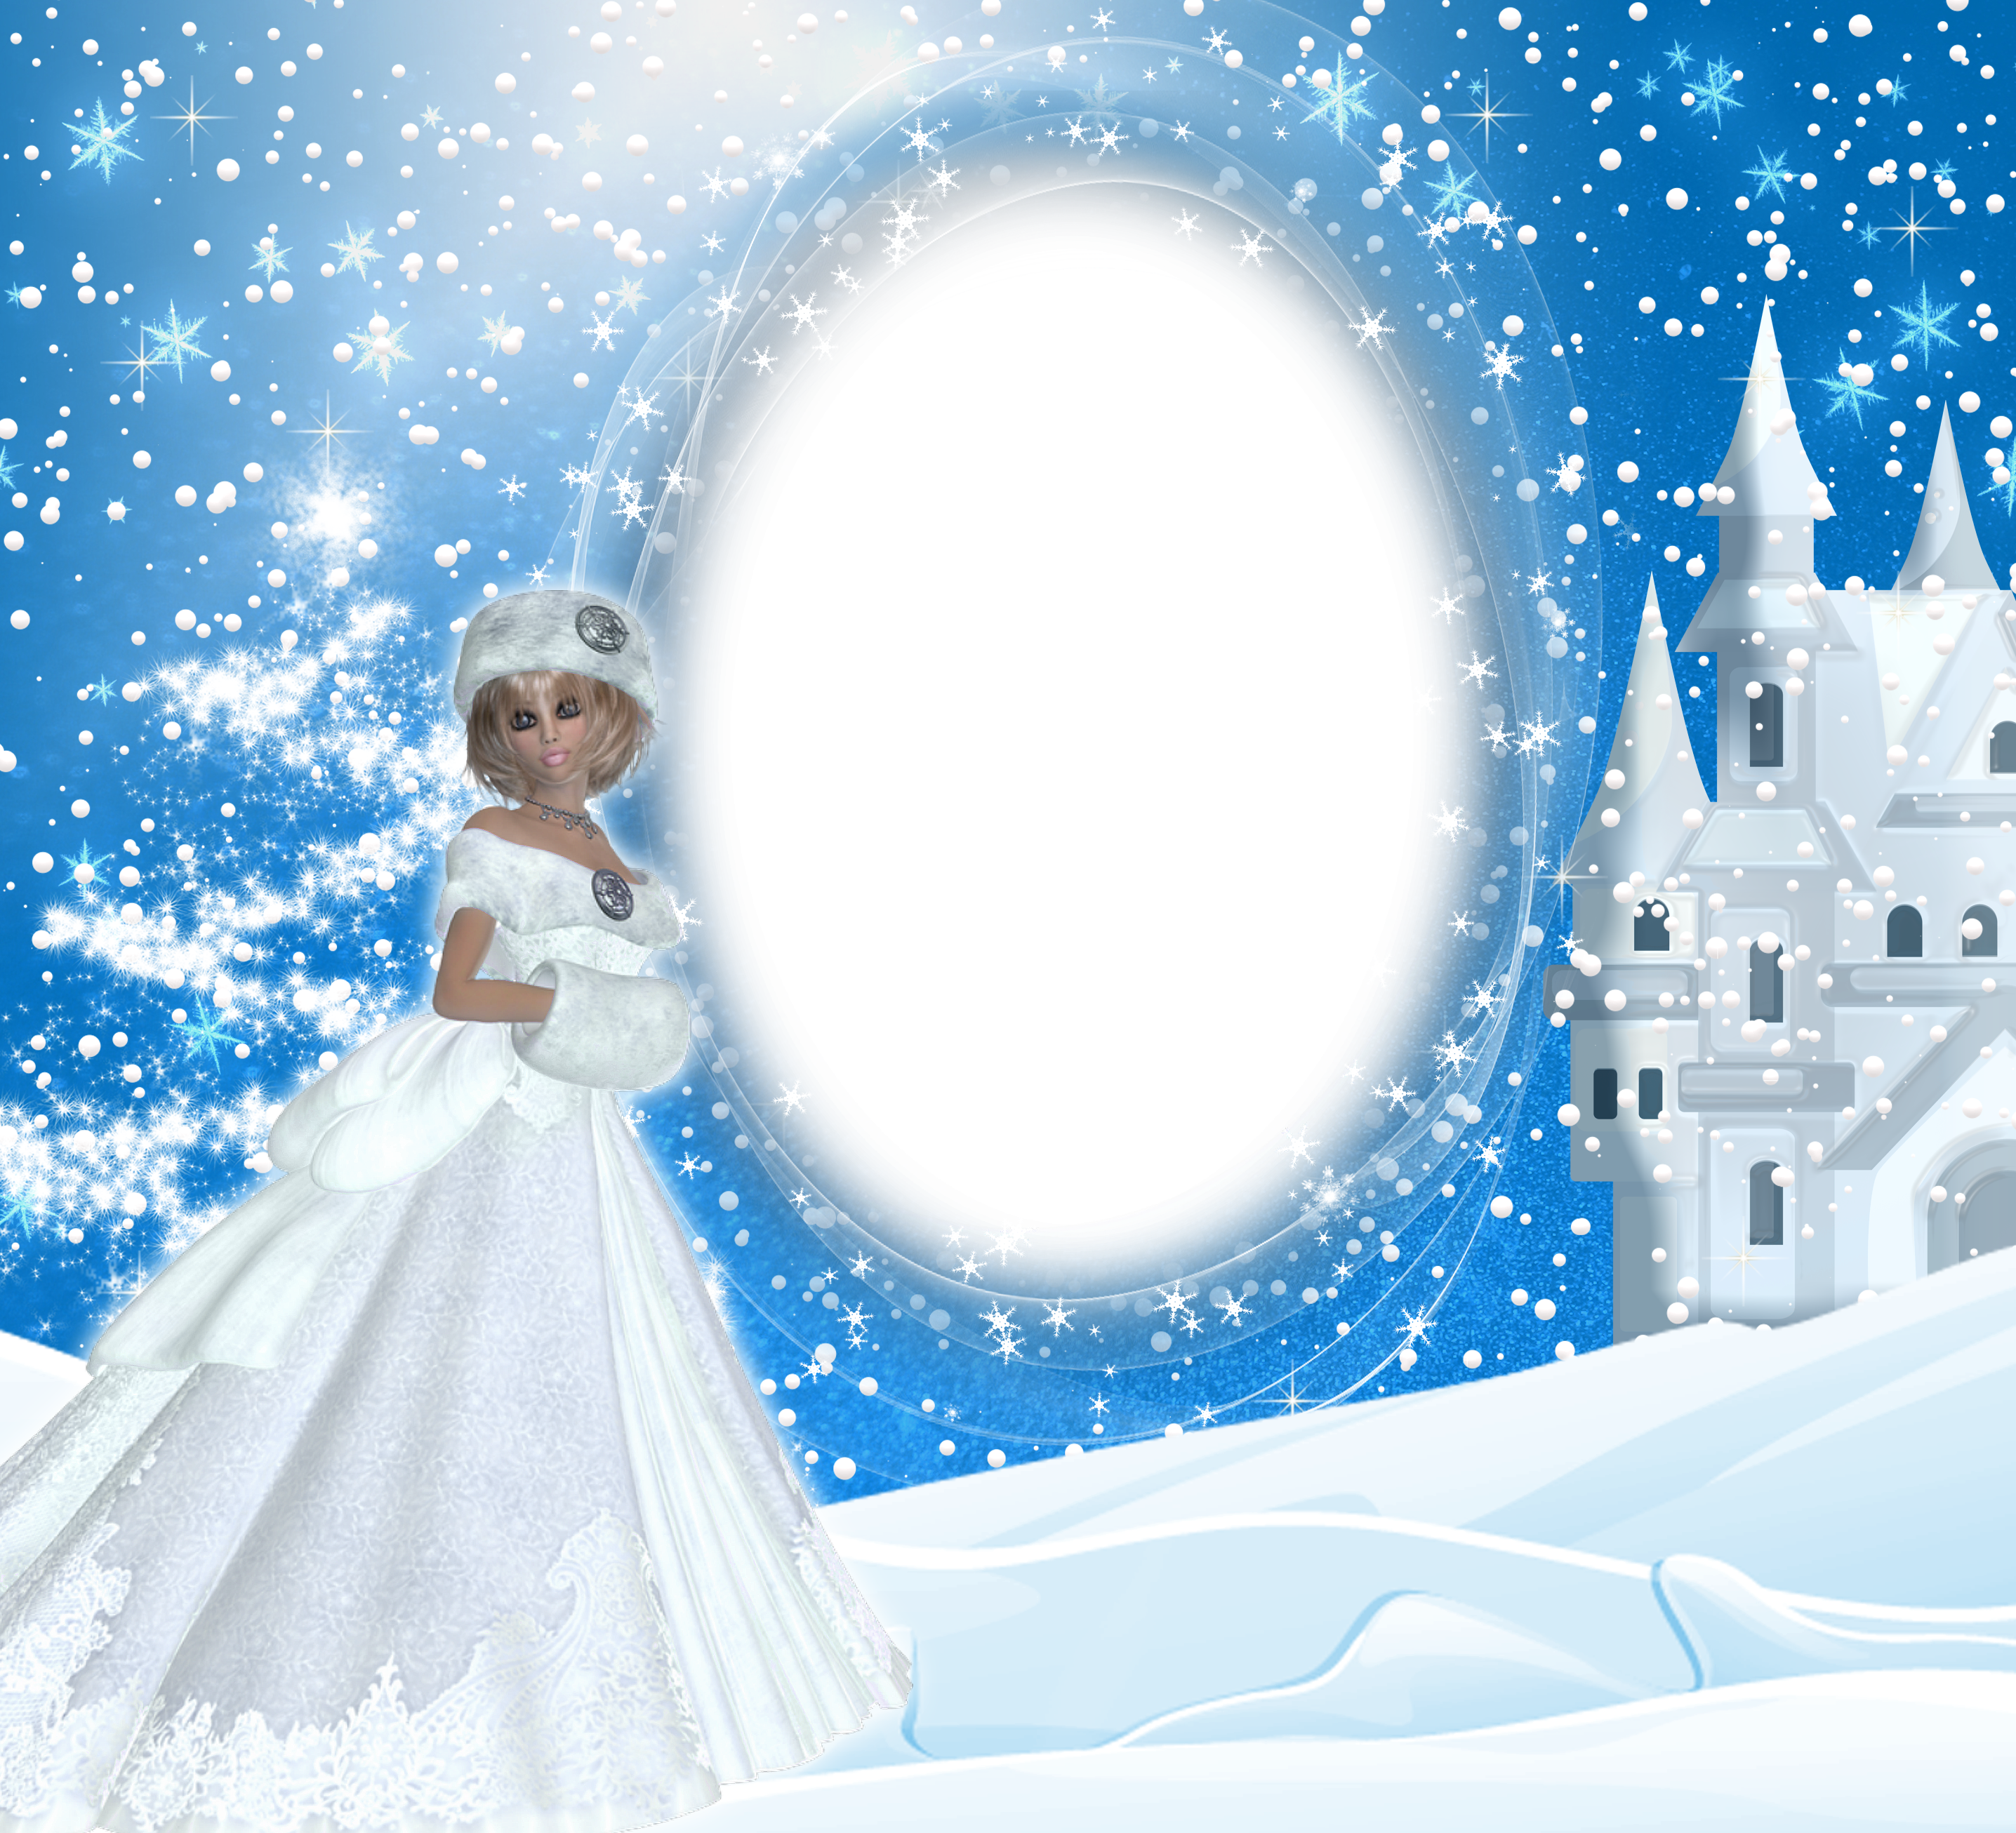 Snow frame png. Winter lady gallery yopriceville